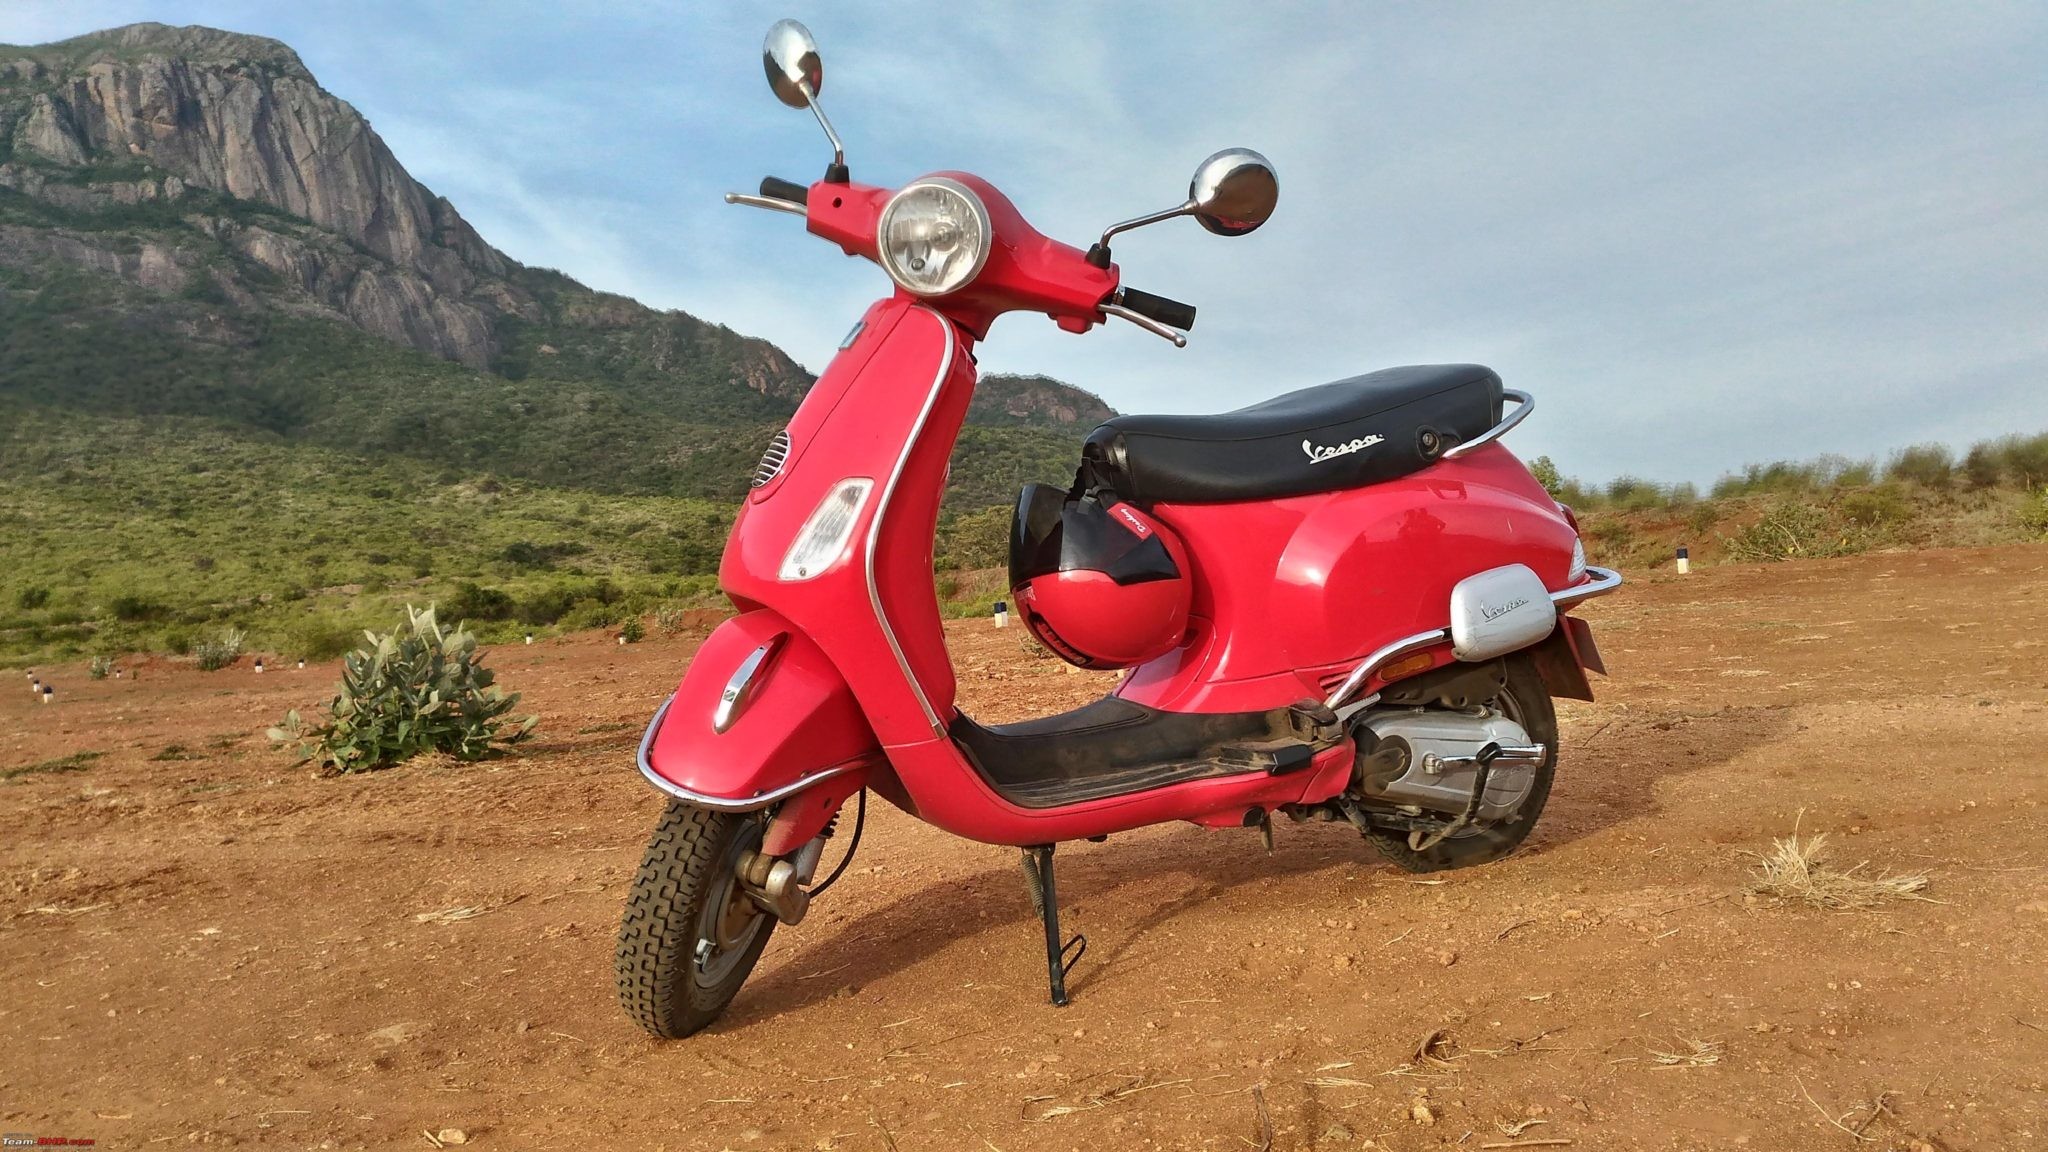 Thanks For Download Our Album - Vespa Scooter Price In Coimbatore - HD Wallpaper 